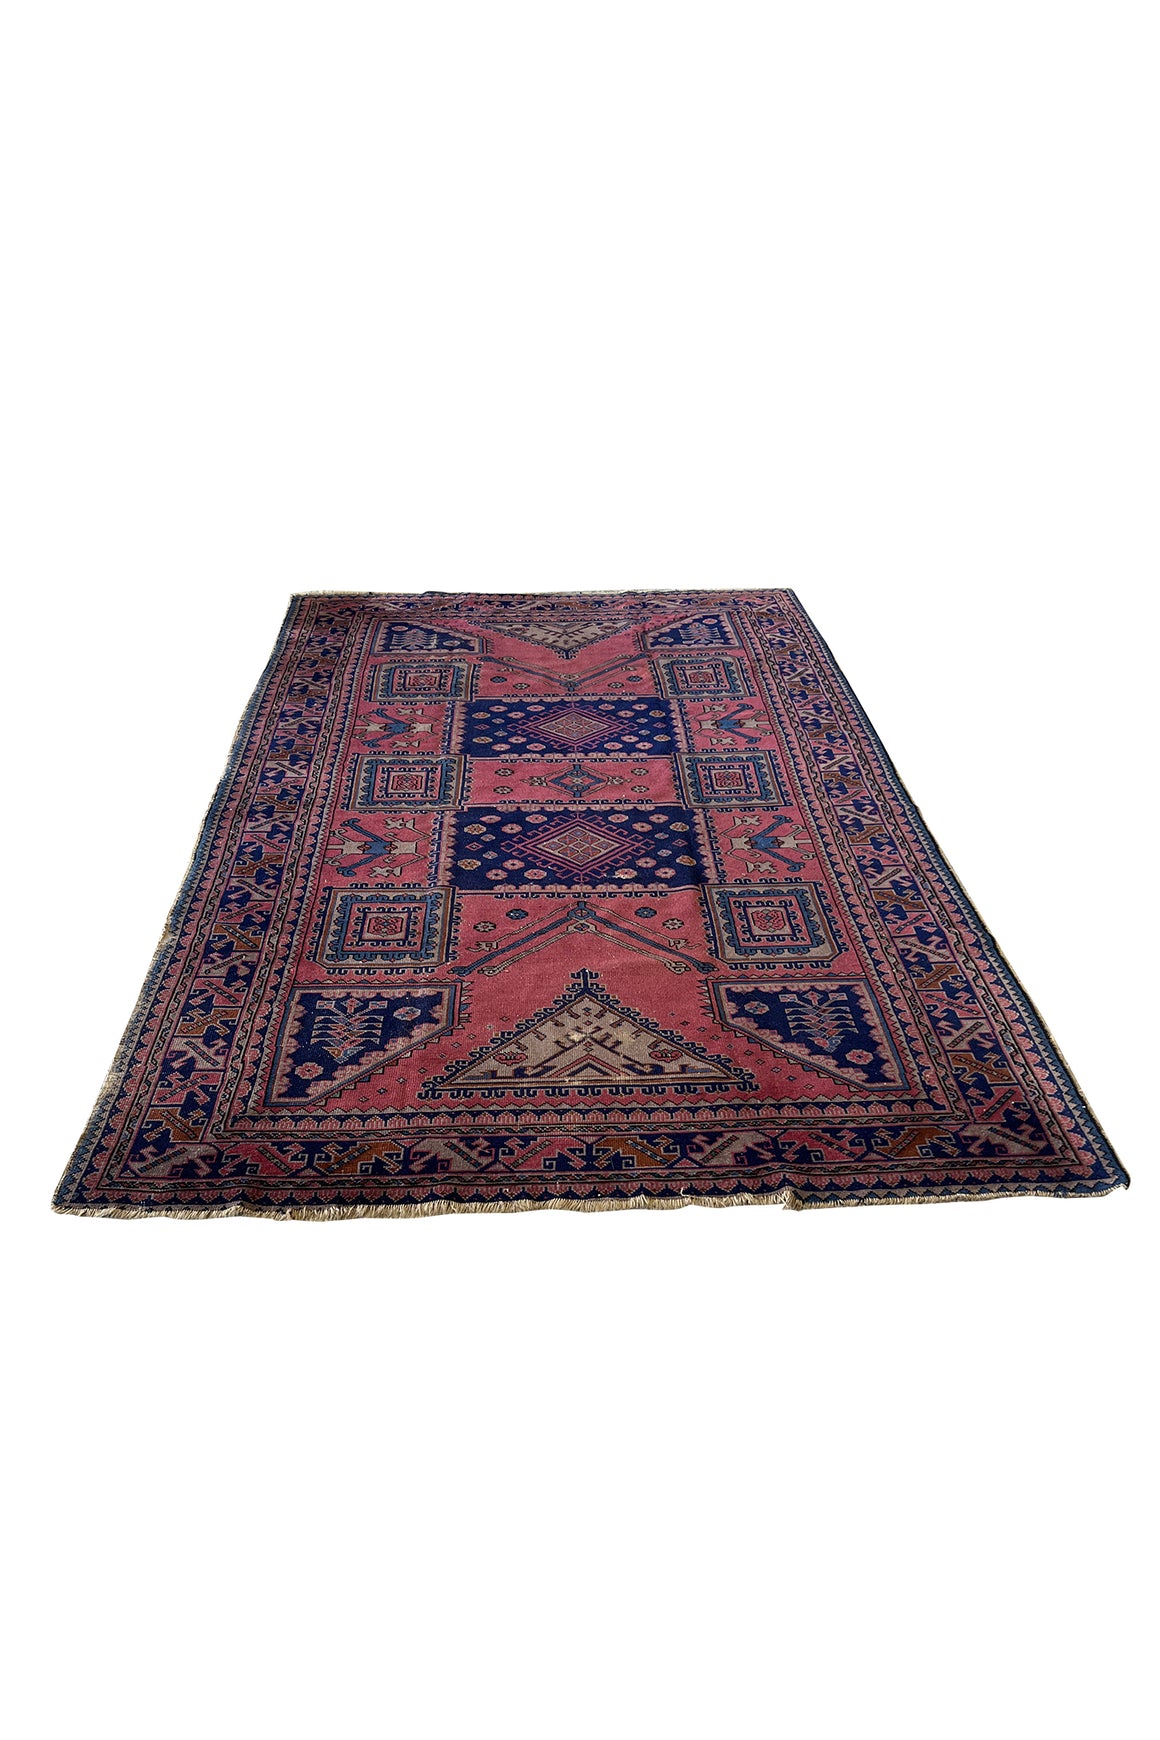 Antique Hand Knotted Kazak Style Rug | 6'2" x 9'6"